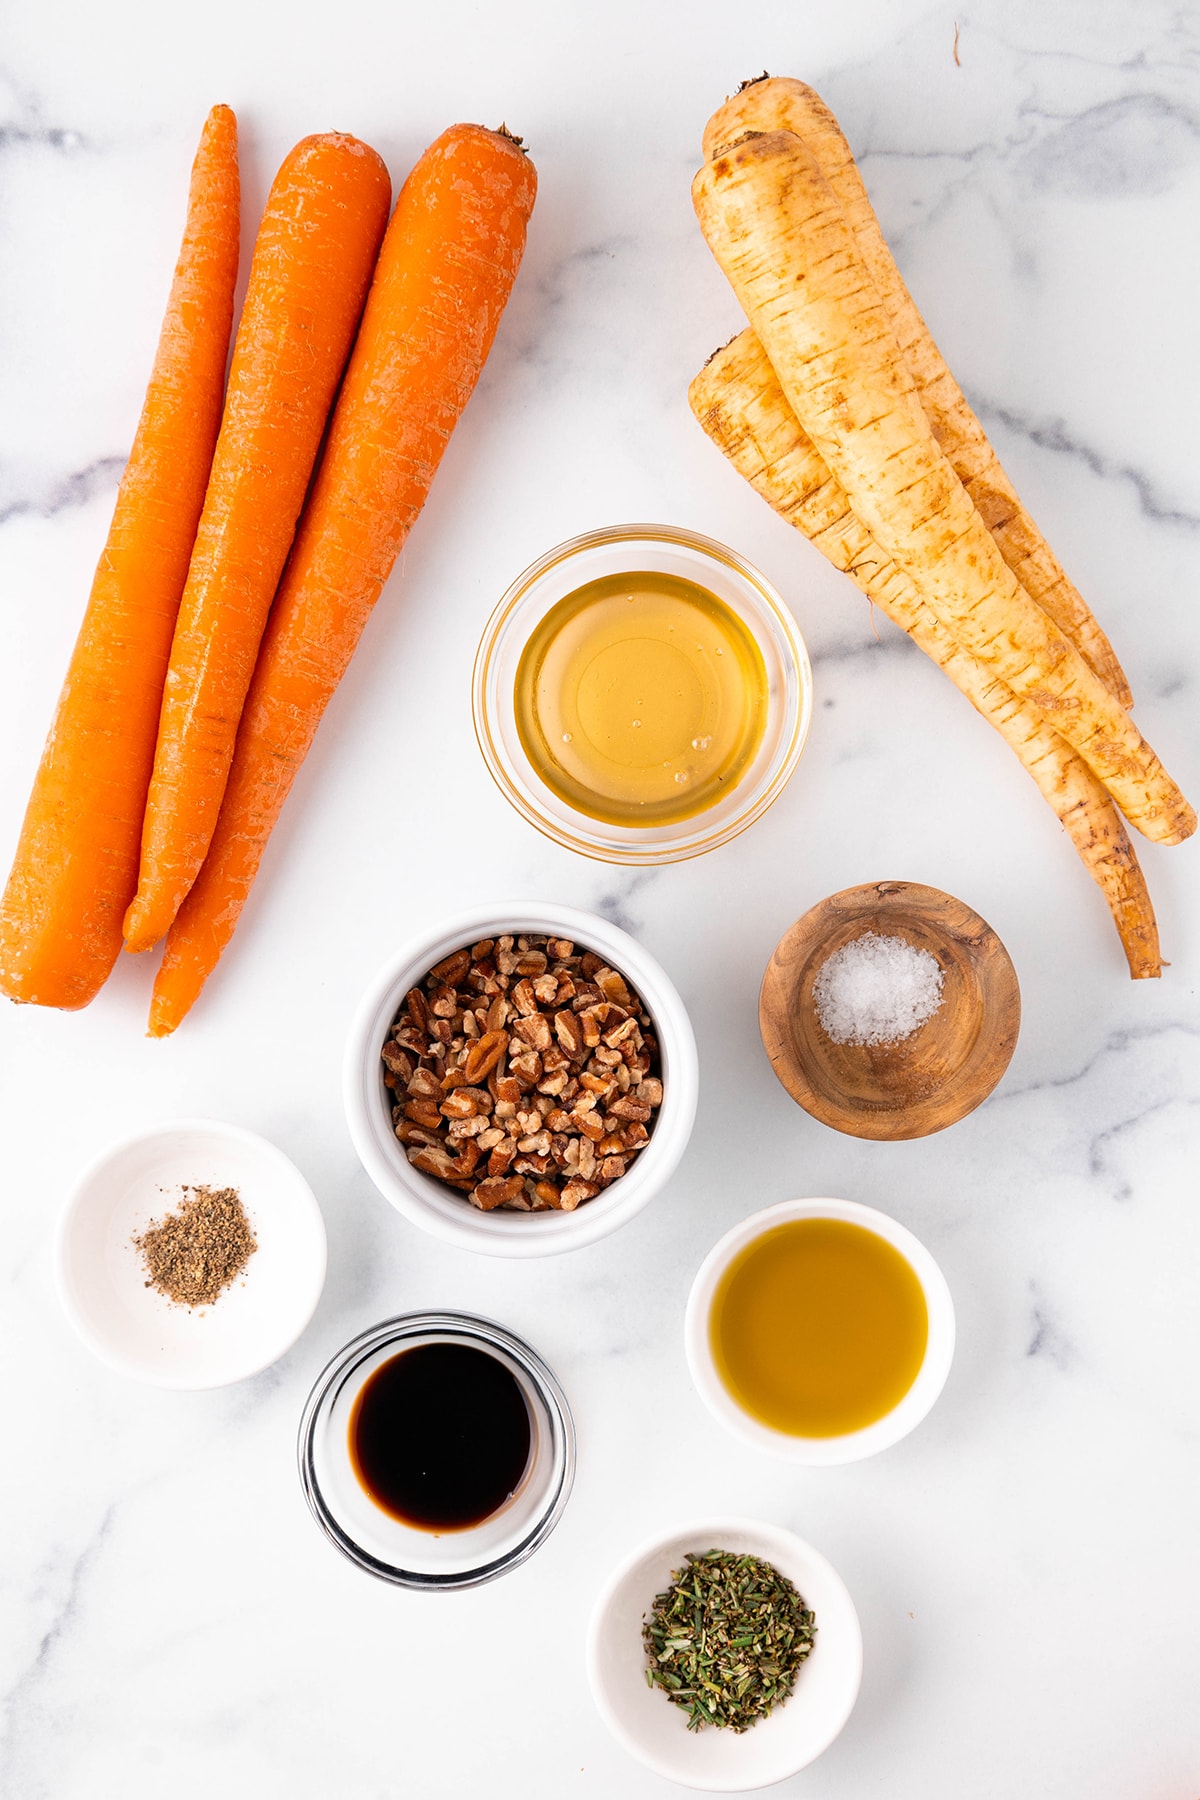 Three large carrots, three large parsnips, and small individual bowls with honey, chopped pecans, olive oil, balsamic vinegar, chopped rosemary, salt, and pepper on a white counter top.